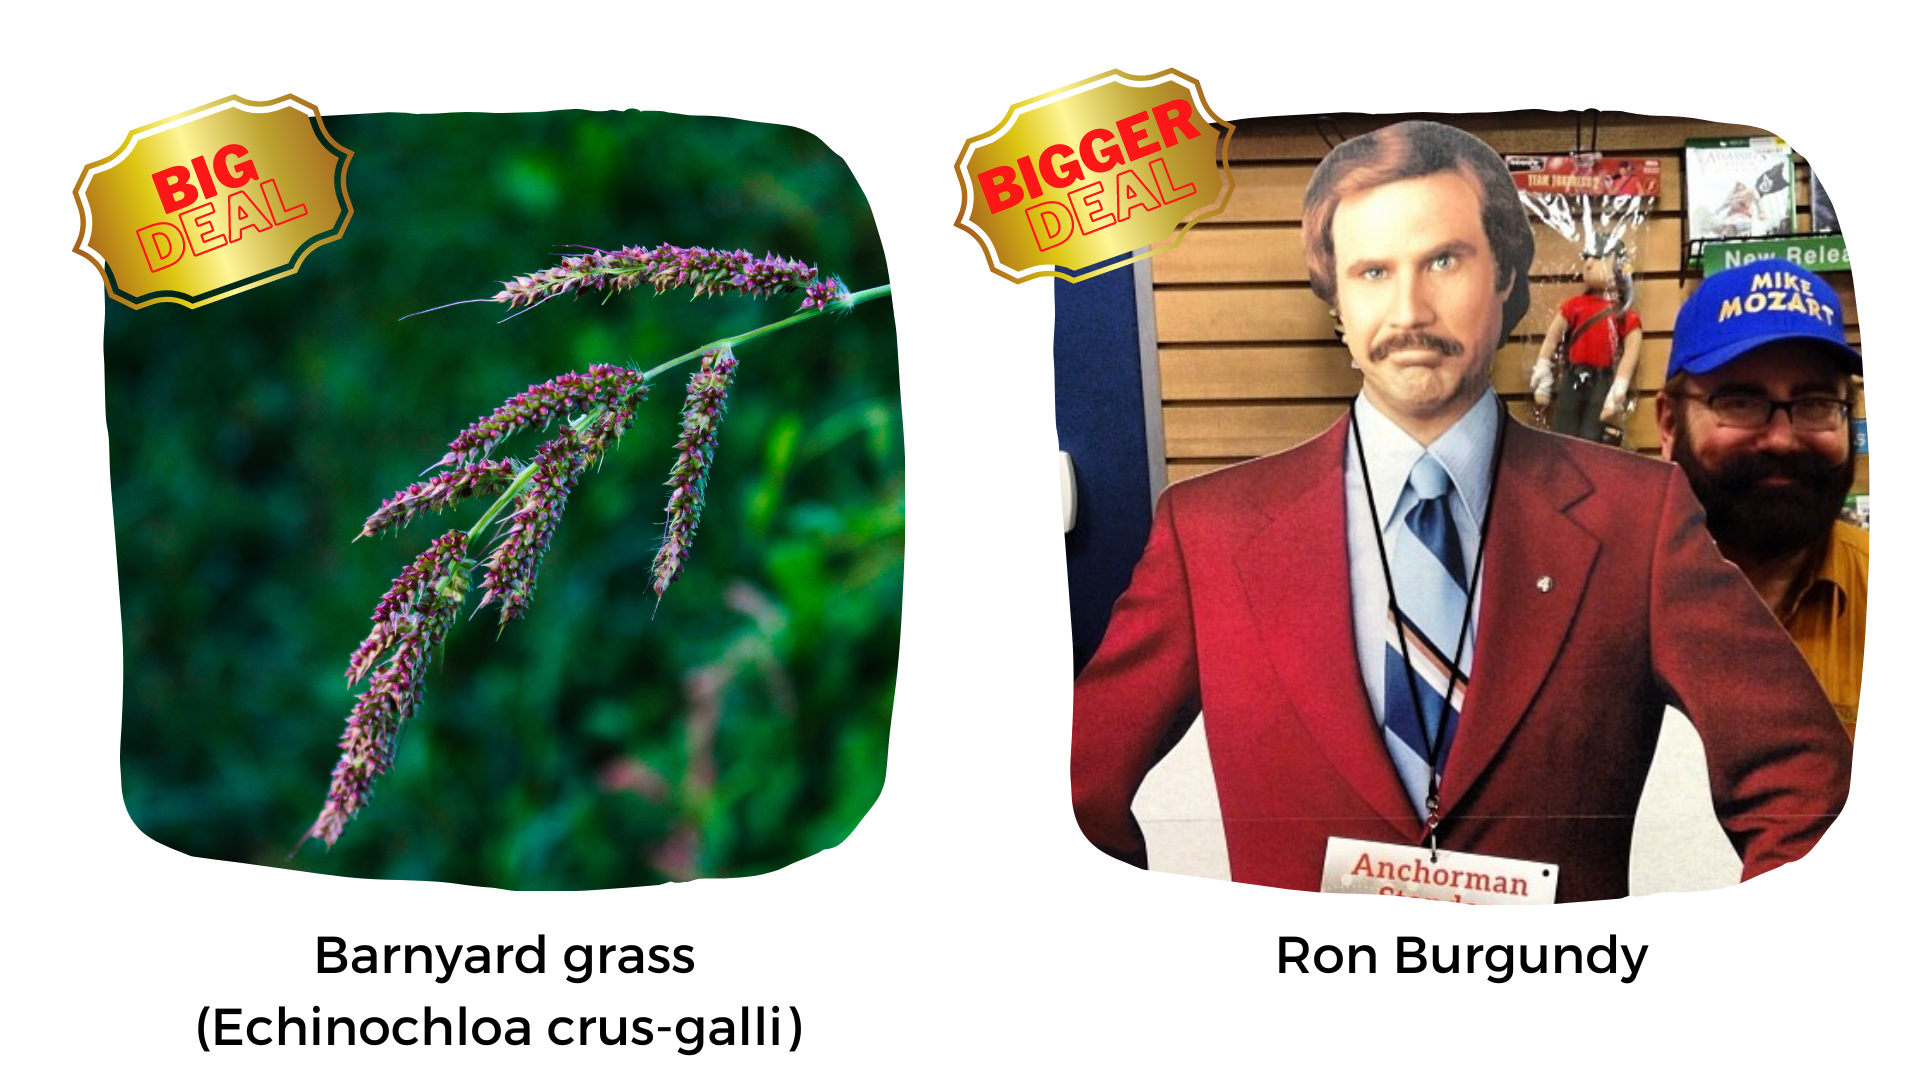 Picture of Barnyard grass (left) with text 'Big Deal' and picture of life-sized cut-out of Ron Burgundy (right) with text 'Bigger Deal'